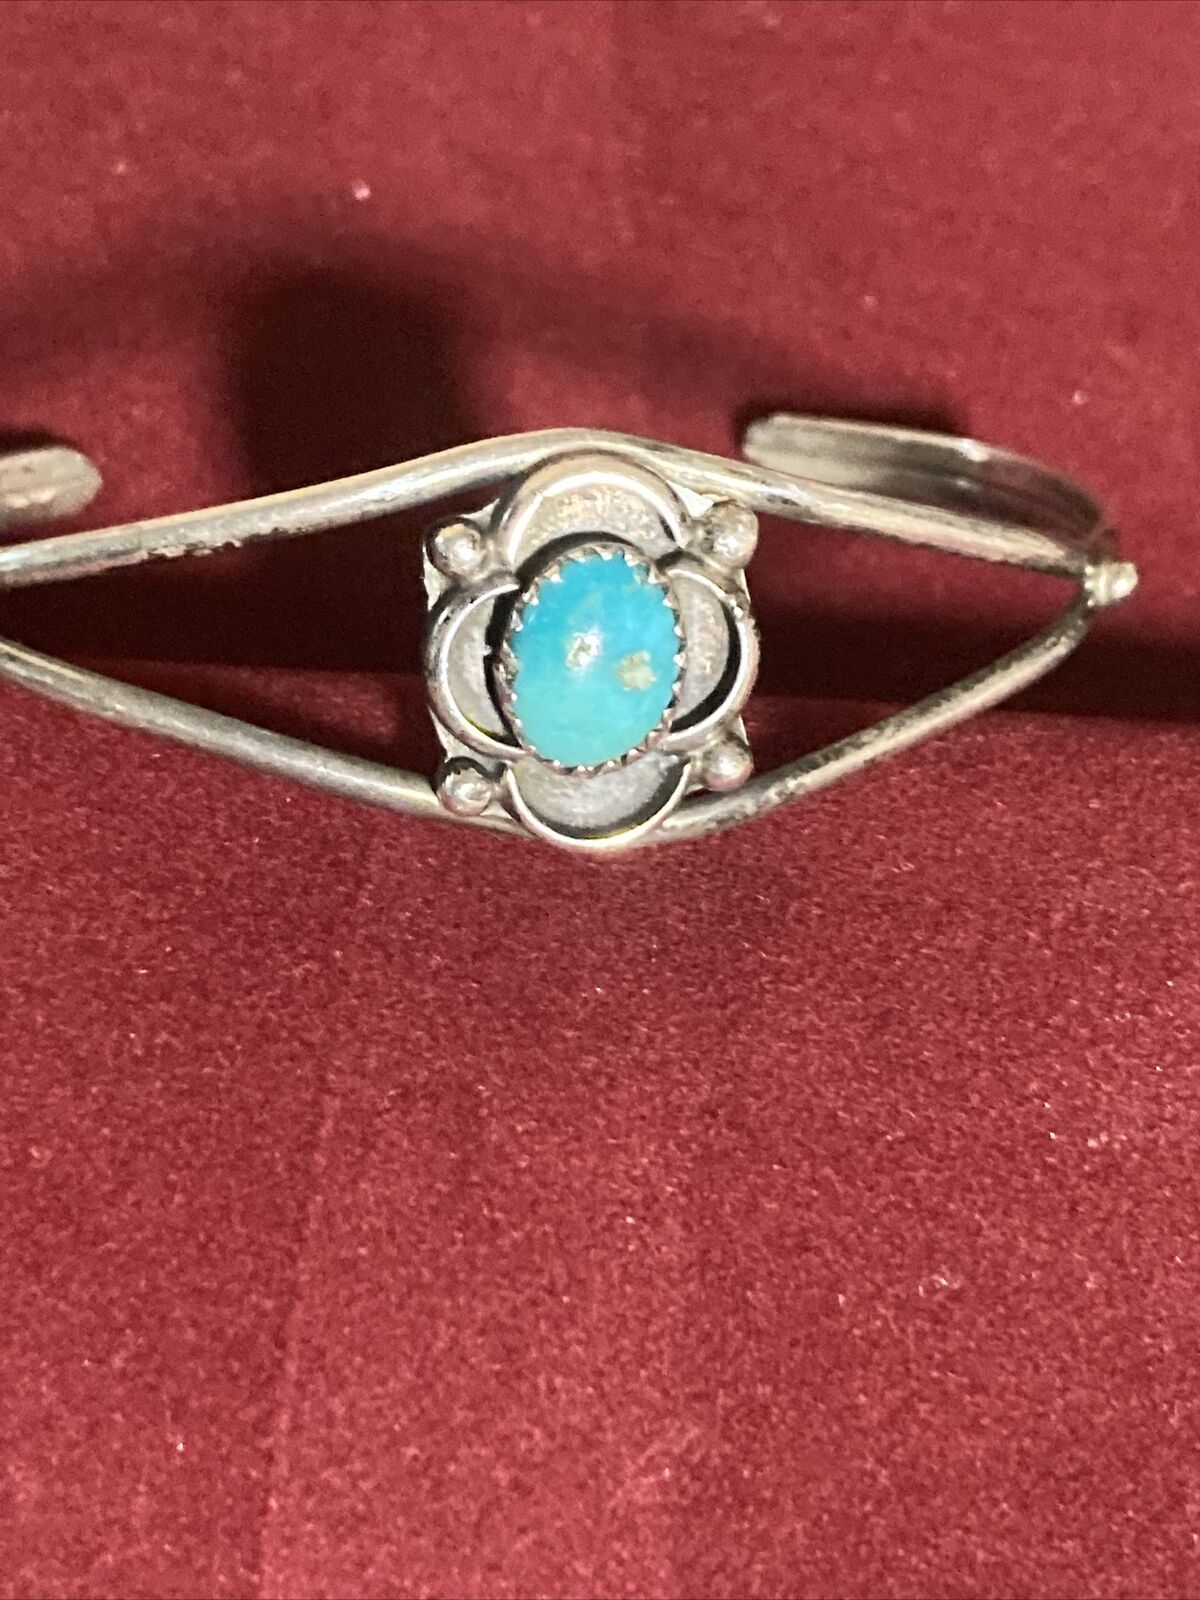 Turquoise And Sterling Silver Cuff Bracelet